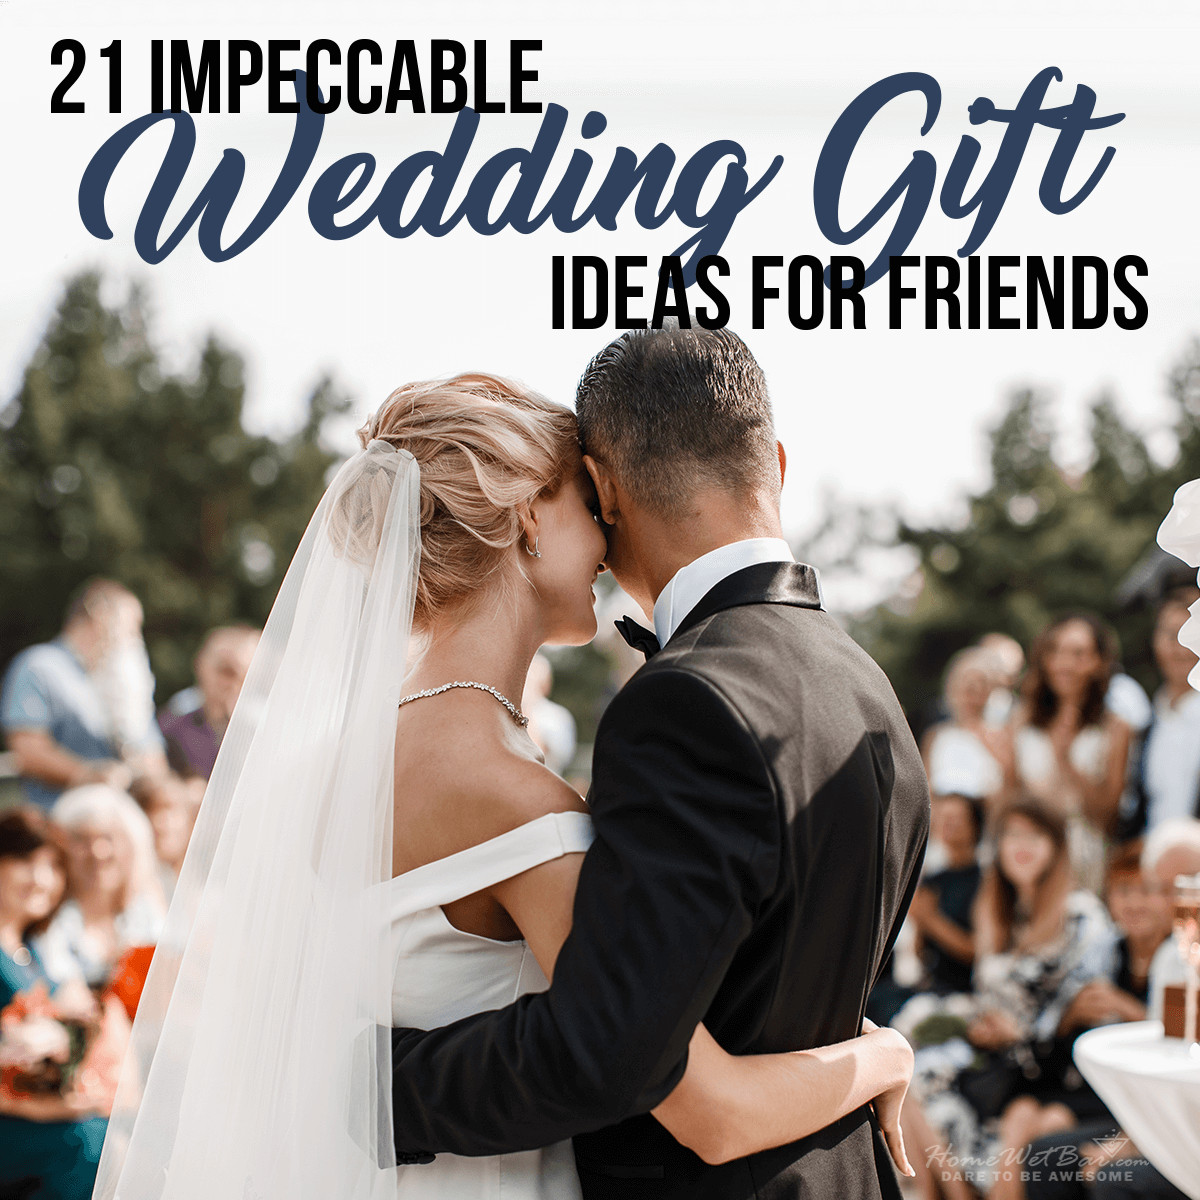 Wedding Gift Ideas For Young Couple
 21 Impeccable Wedding Gift Ideas for Friends